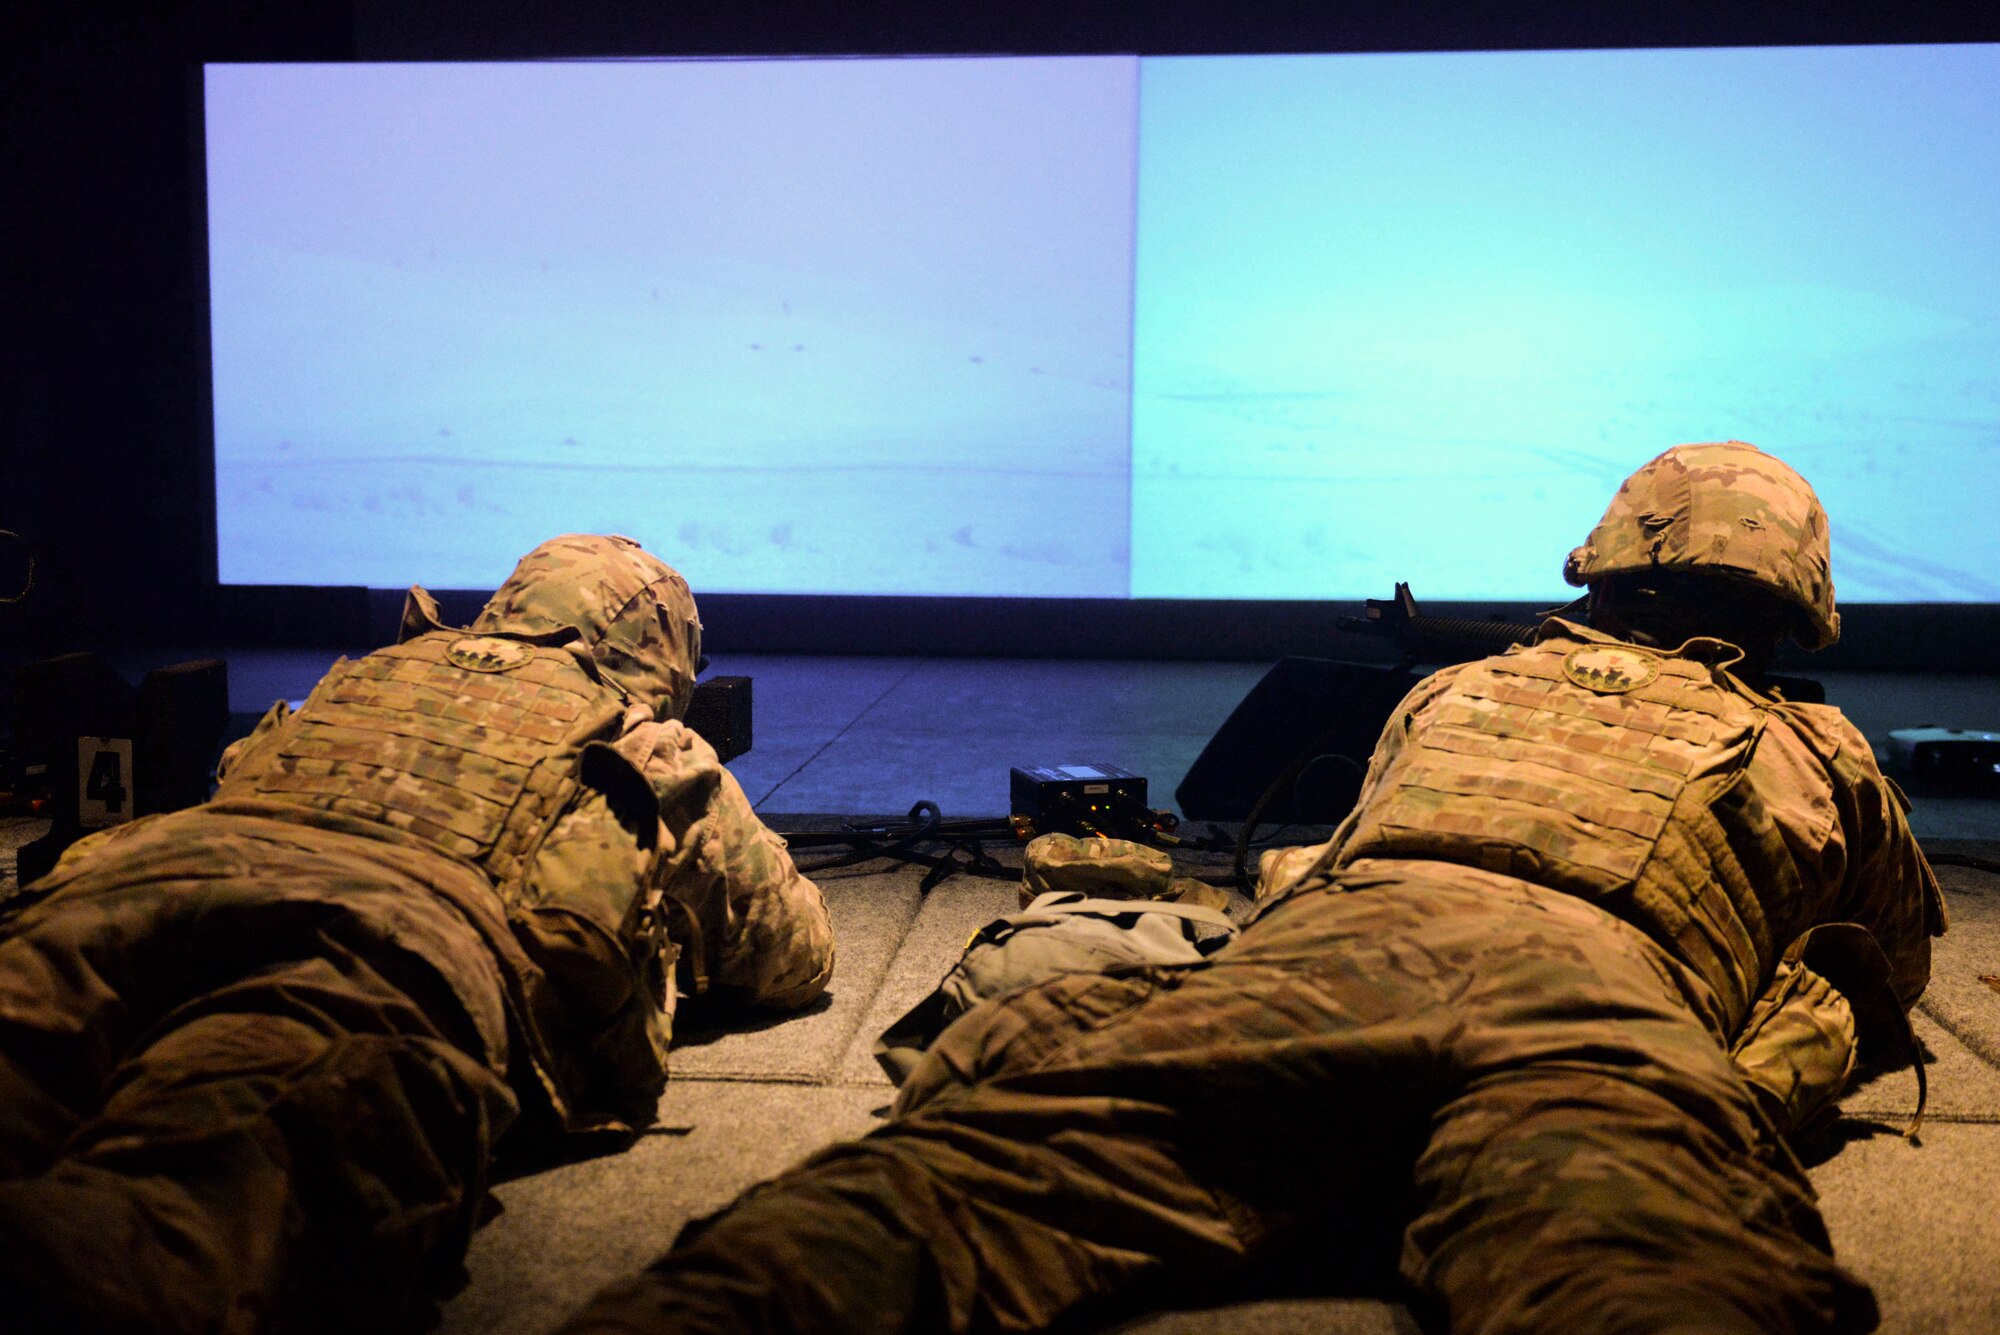 Airmen from the 91st Missile Security Forces Squadron use the U.S. Army’s Engagement Skills Trainer 2000 at the Camp Grafton Training Center in Devils Lake, N.D., Sept. 7, 2016. The EST 2000 is a firearms training simulator that allows Airmen to focus on firing position, breathing and sight alignment. (U.S. Air Force photo/Airman 1st Class Jessica Weissman)